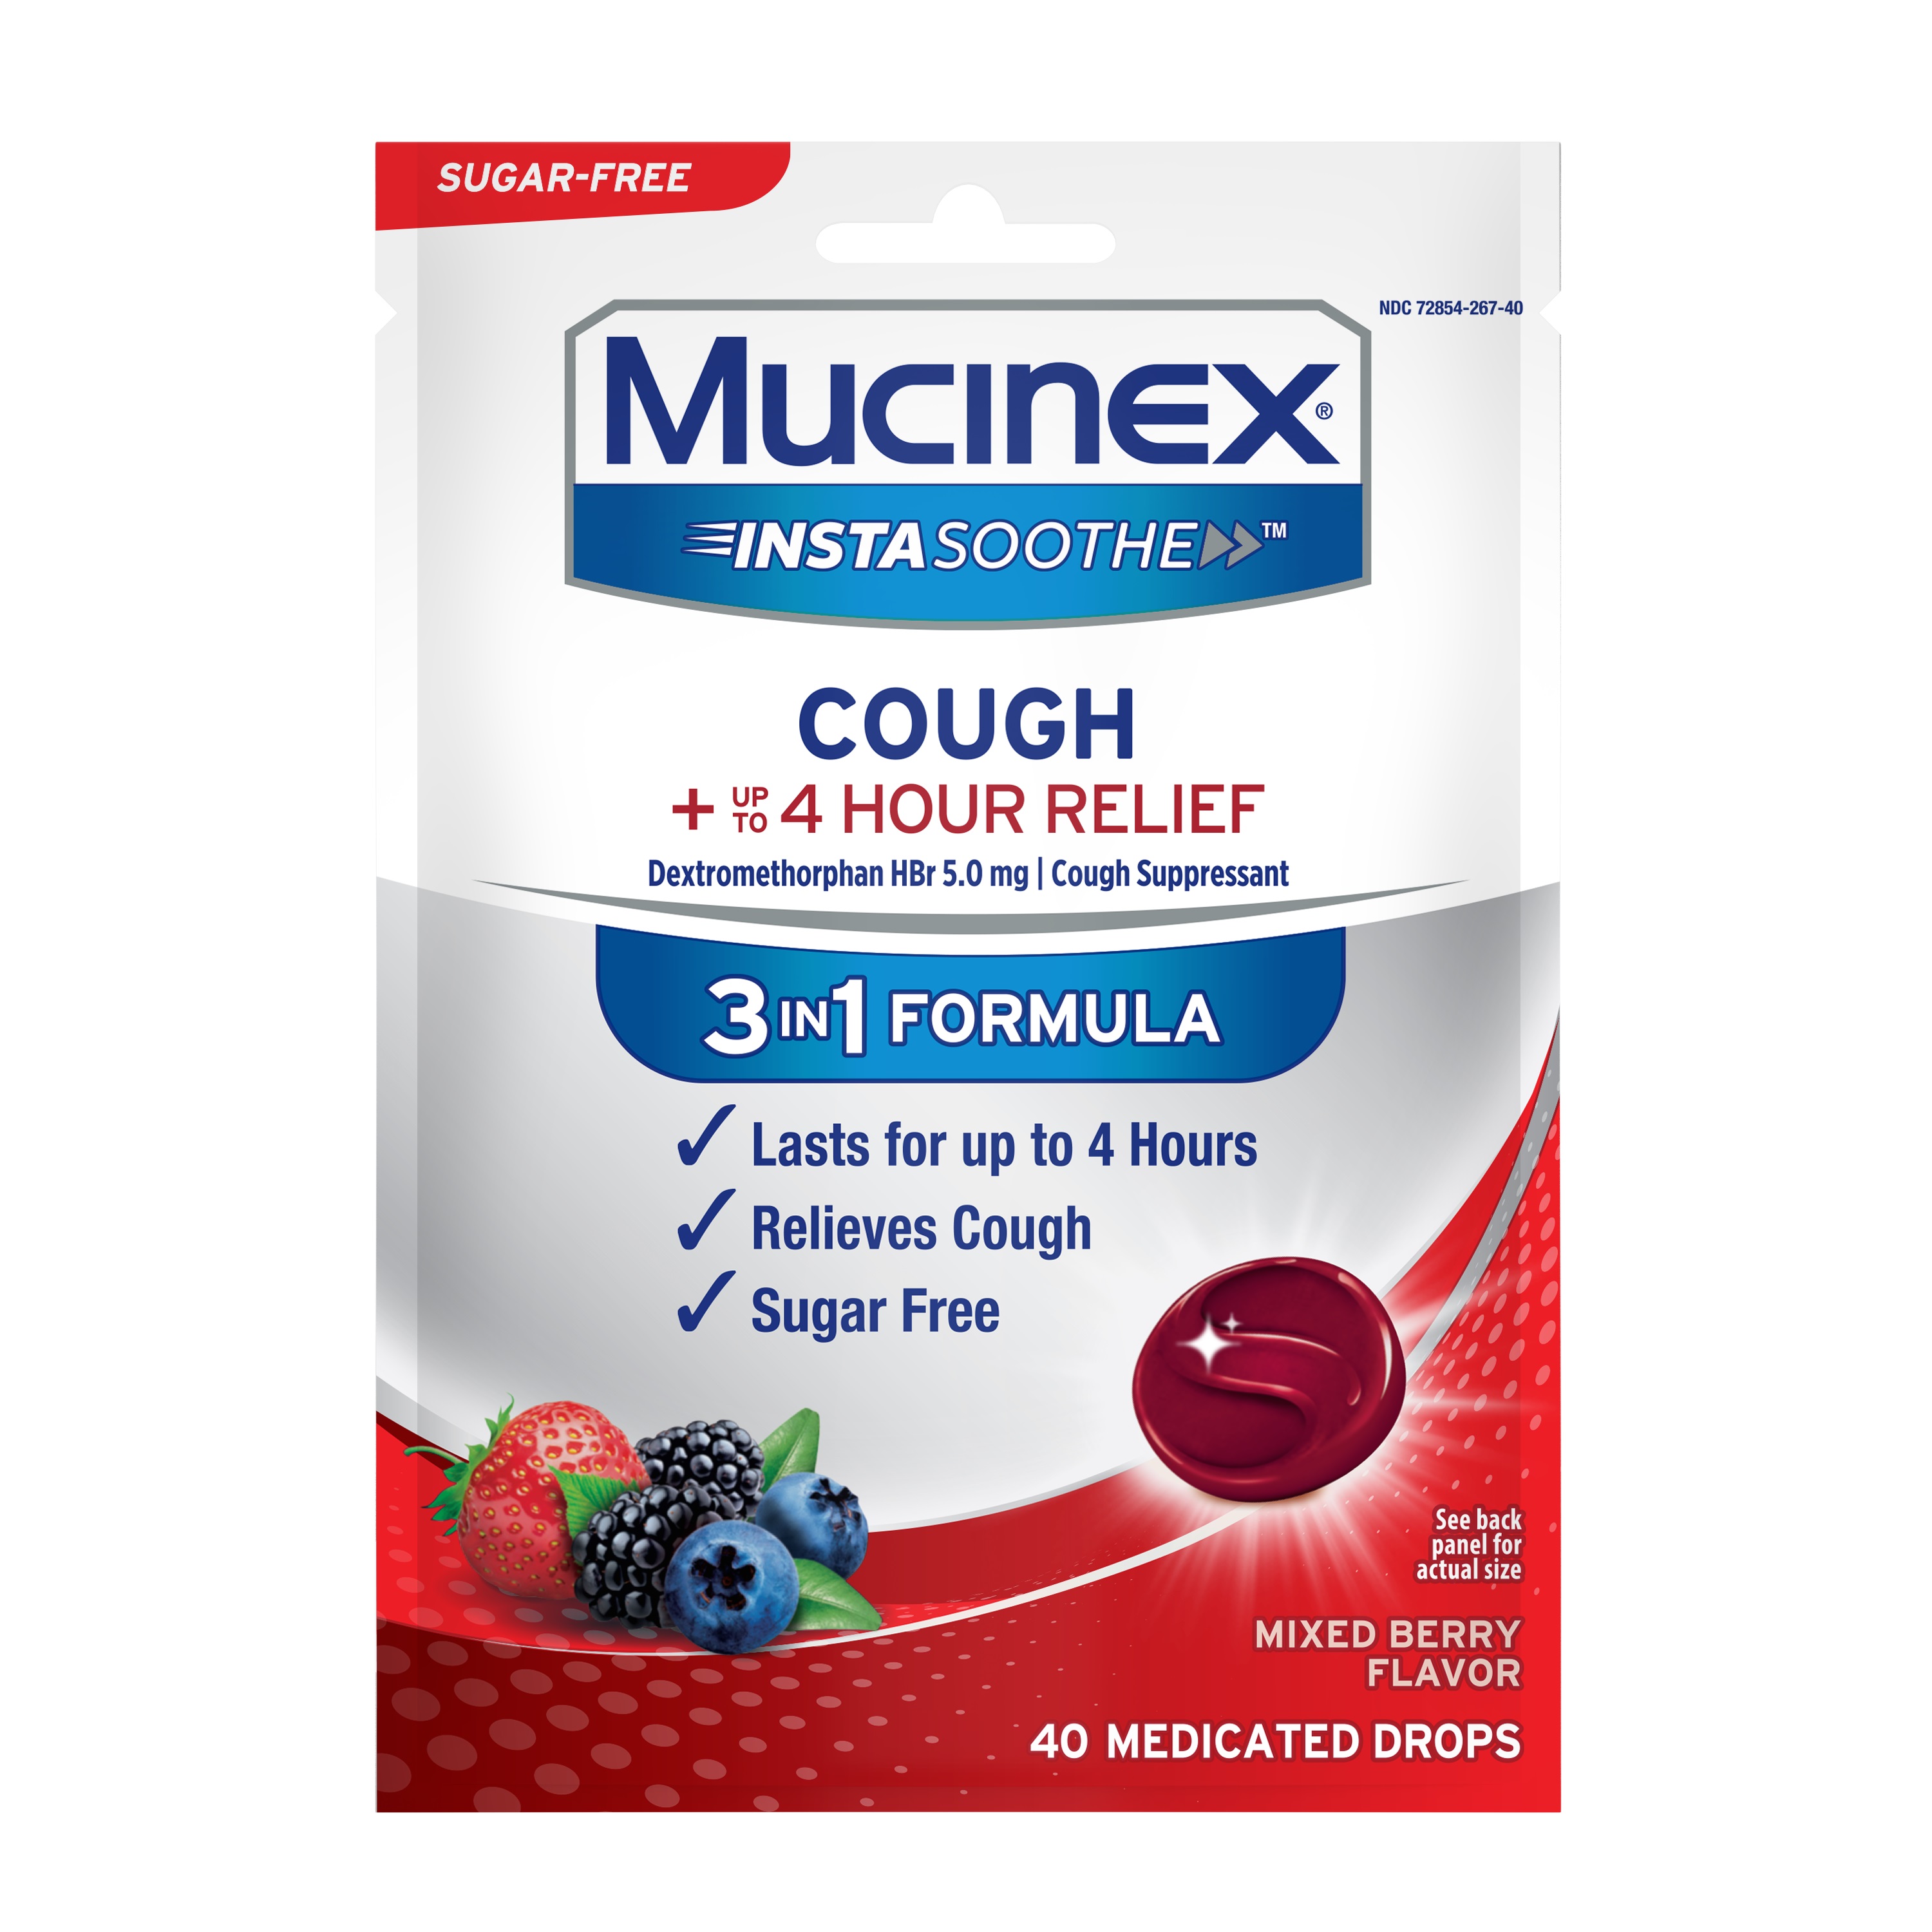 MUCINEX Instasoothe Medicated Cough Drops  Mixed Berry